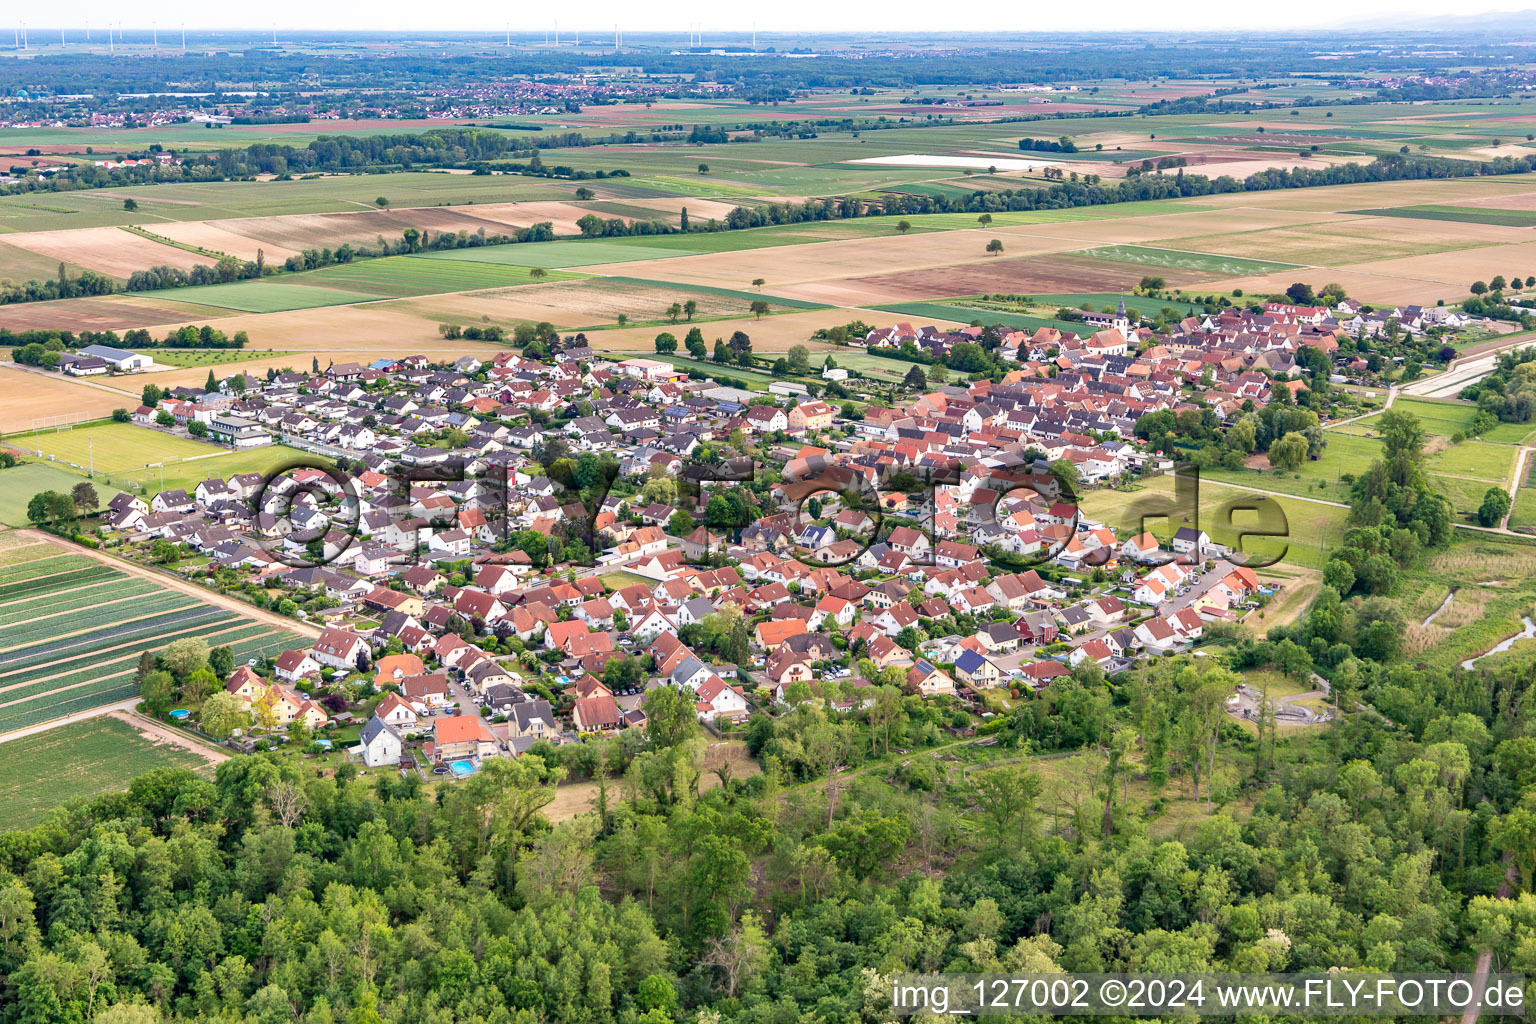 Freisbach in the state Rhineland-Palatinate, Germany from the drone perspective